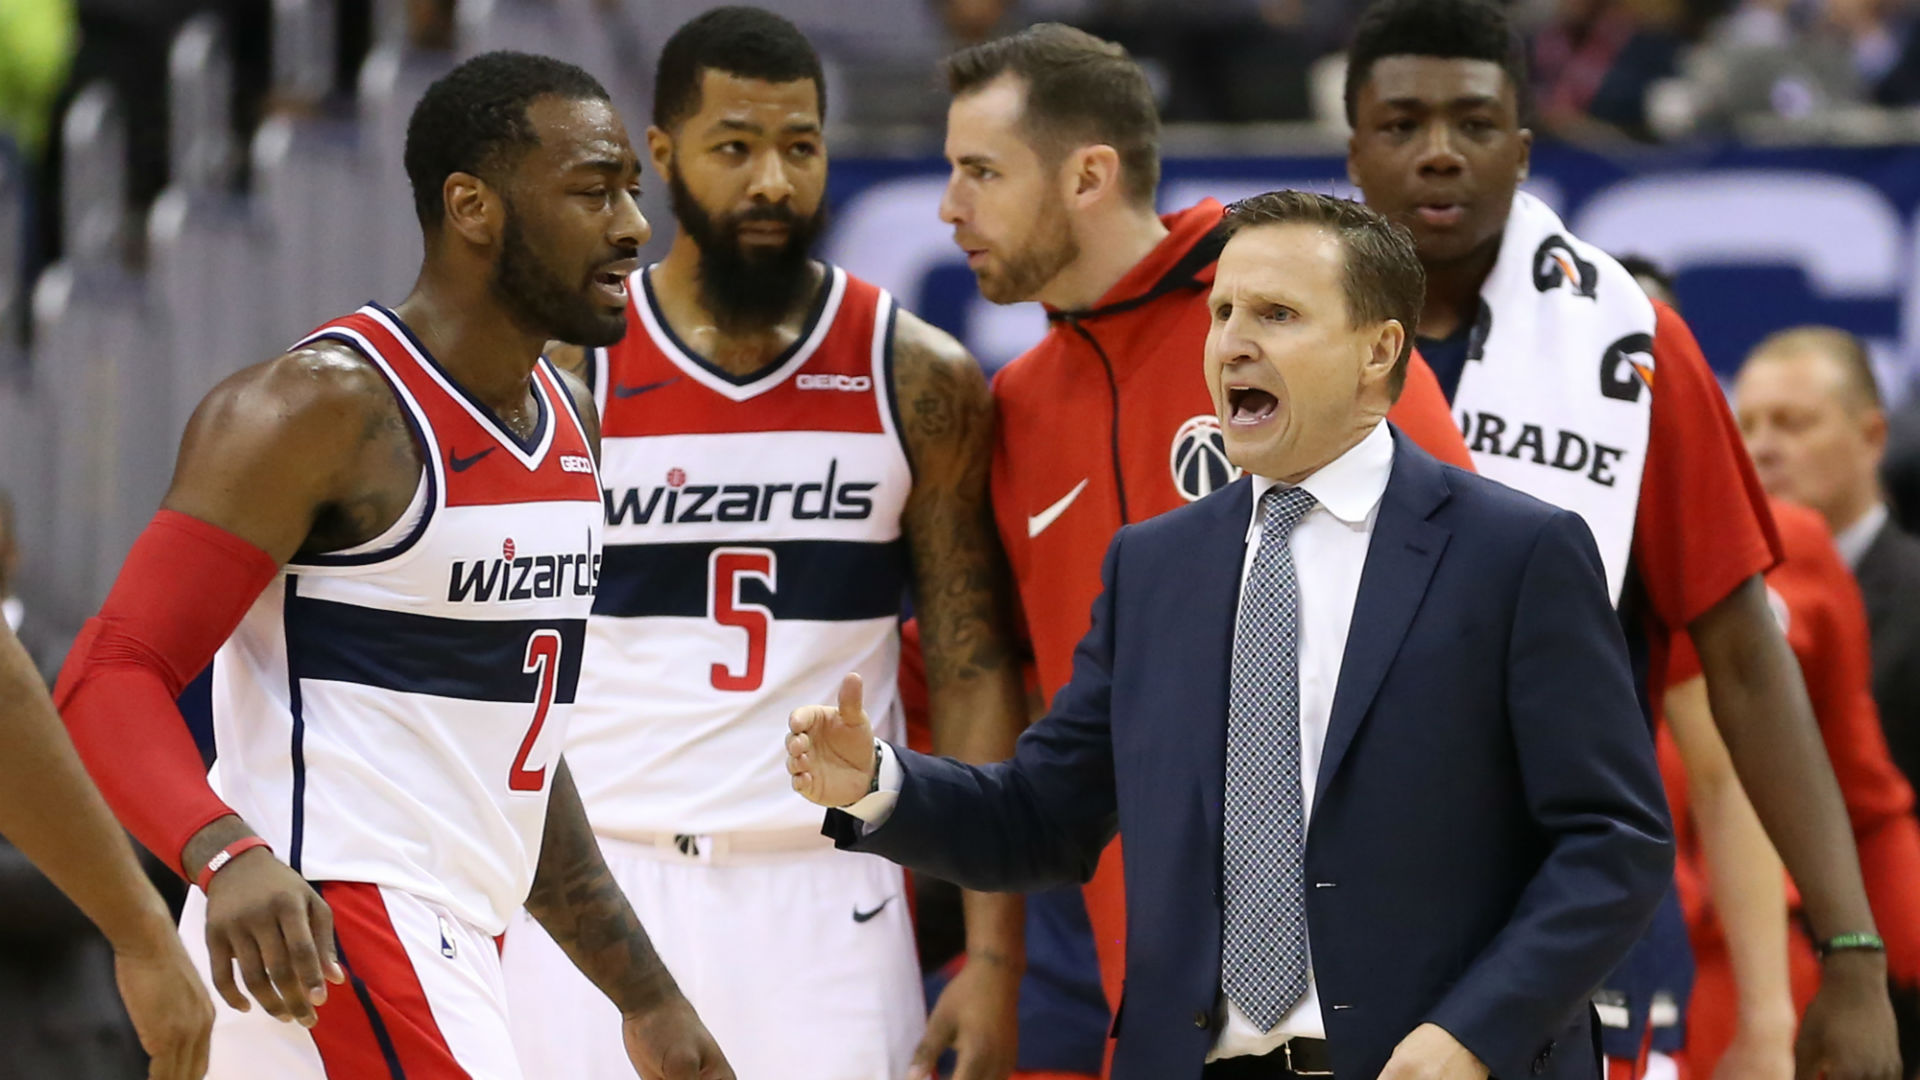 John Wall and Dwight Howard may be absent, but Scott Brooks has no doubt the Washington Wizards can make a run for the playoffs.